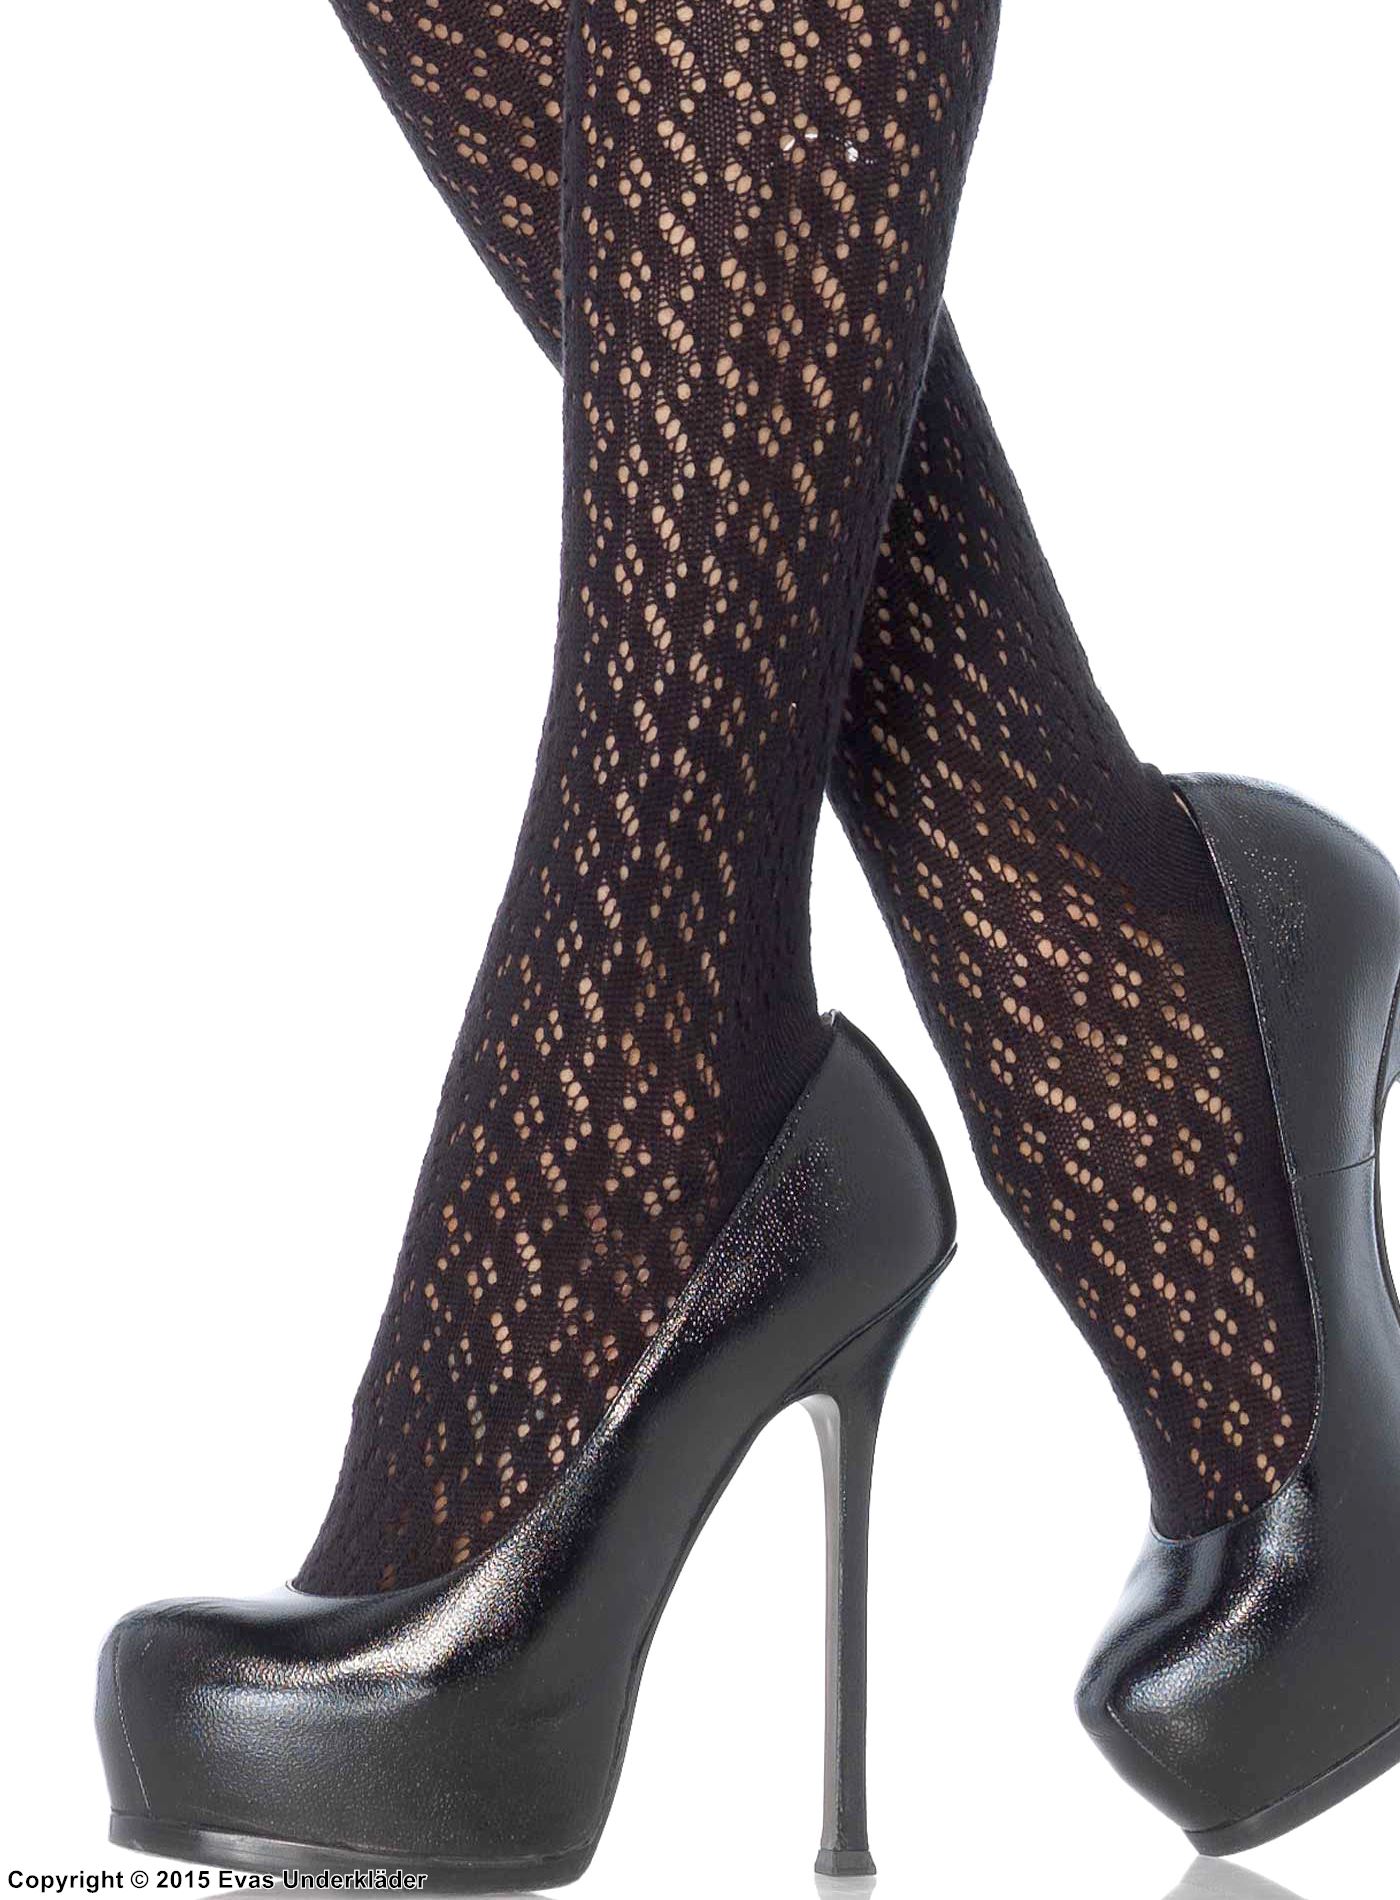 Over-knee socks, openwork, bow, lace trim